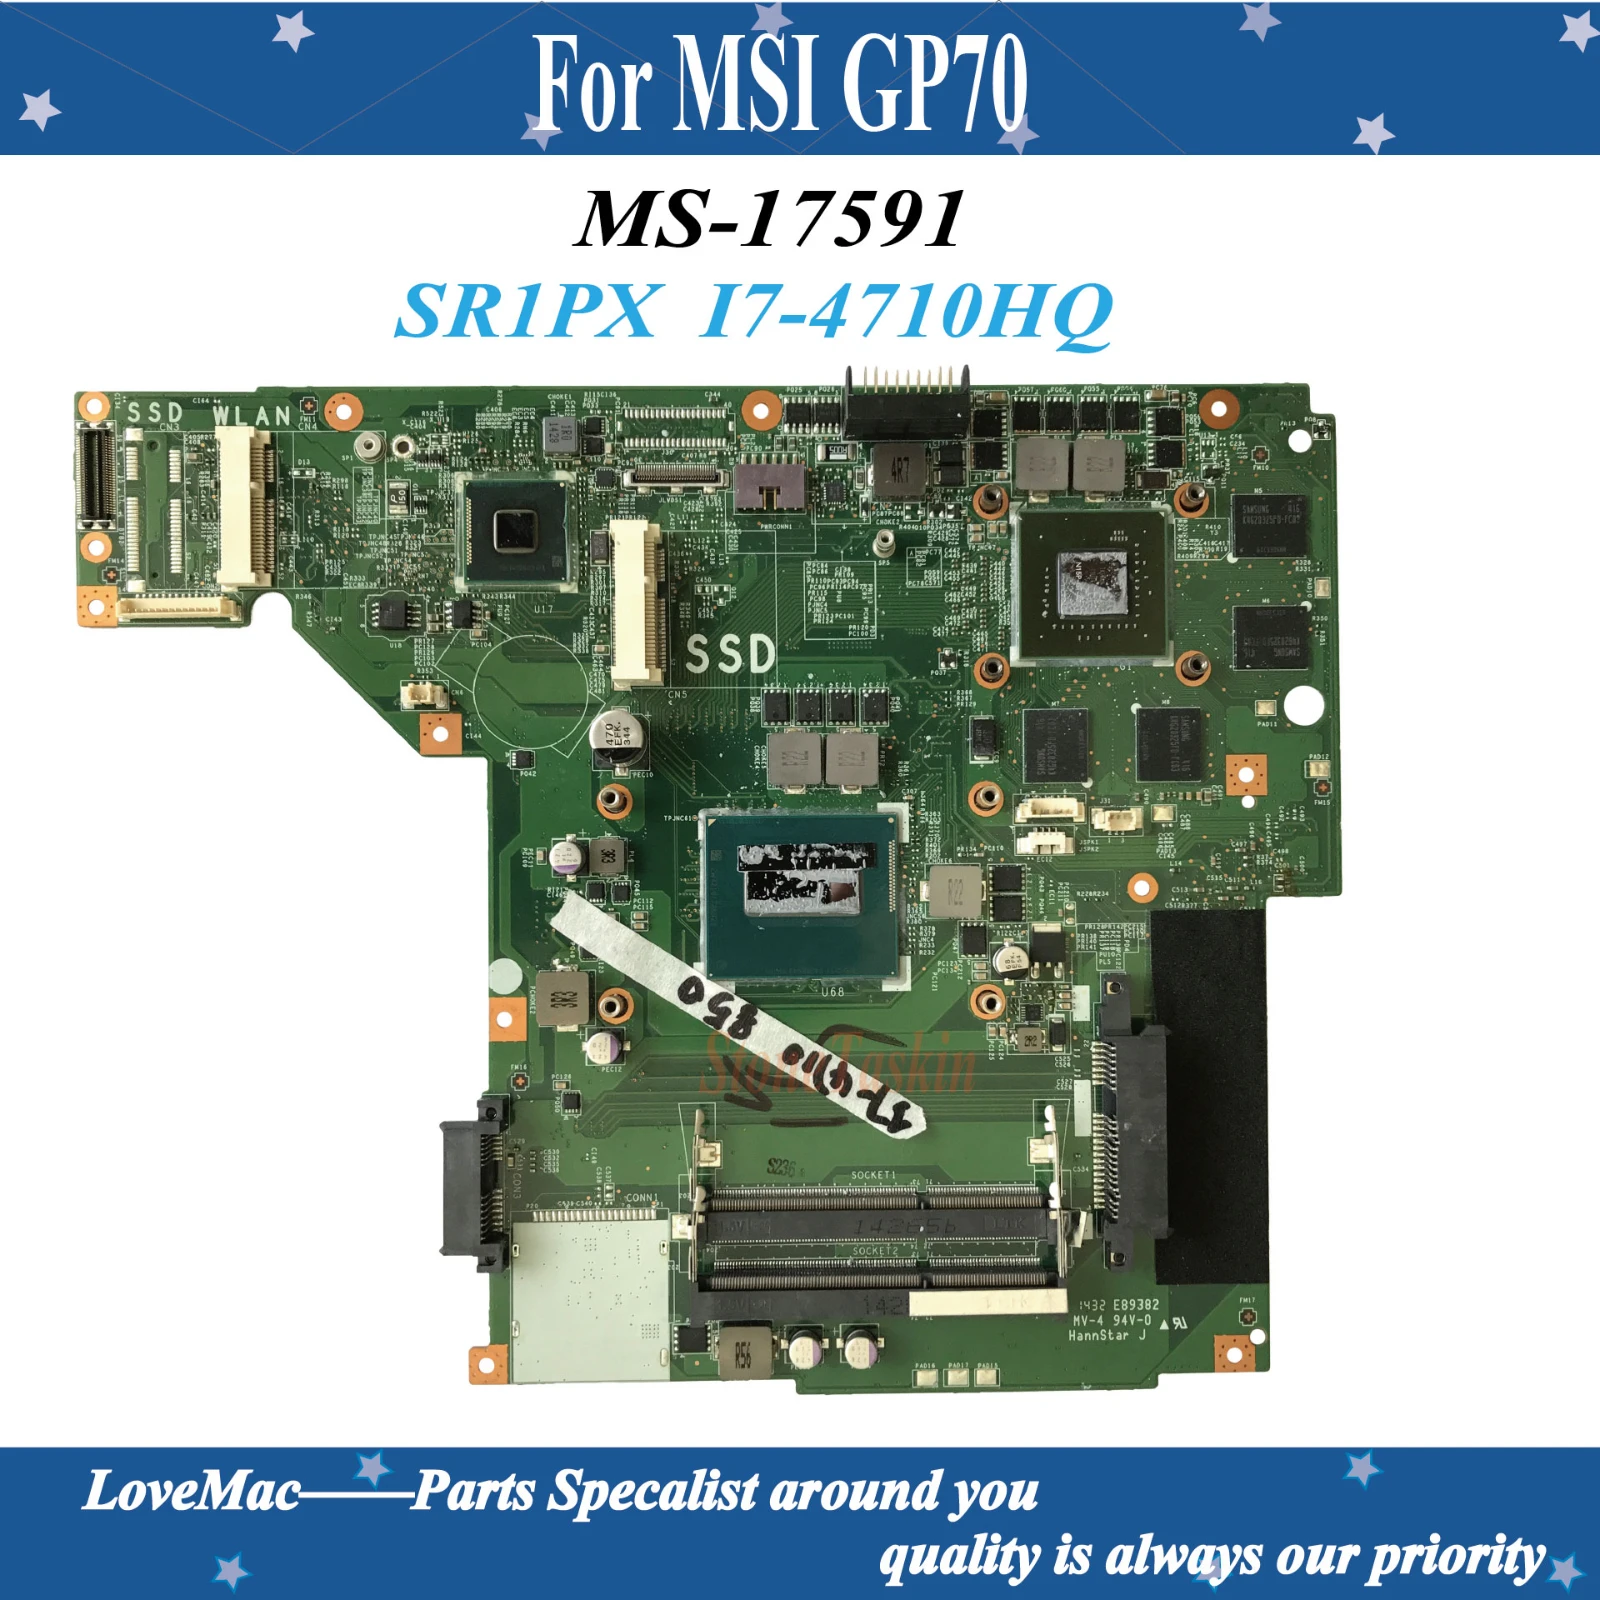 

High quality MS-17591 for MSI GP70 Laptop Motherboard VER:1.0 SR1PX I7-4710HQ DDR3 N15P-GT-A2 100% tested